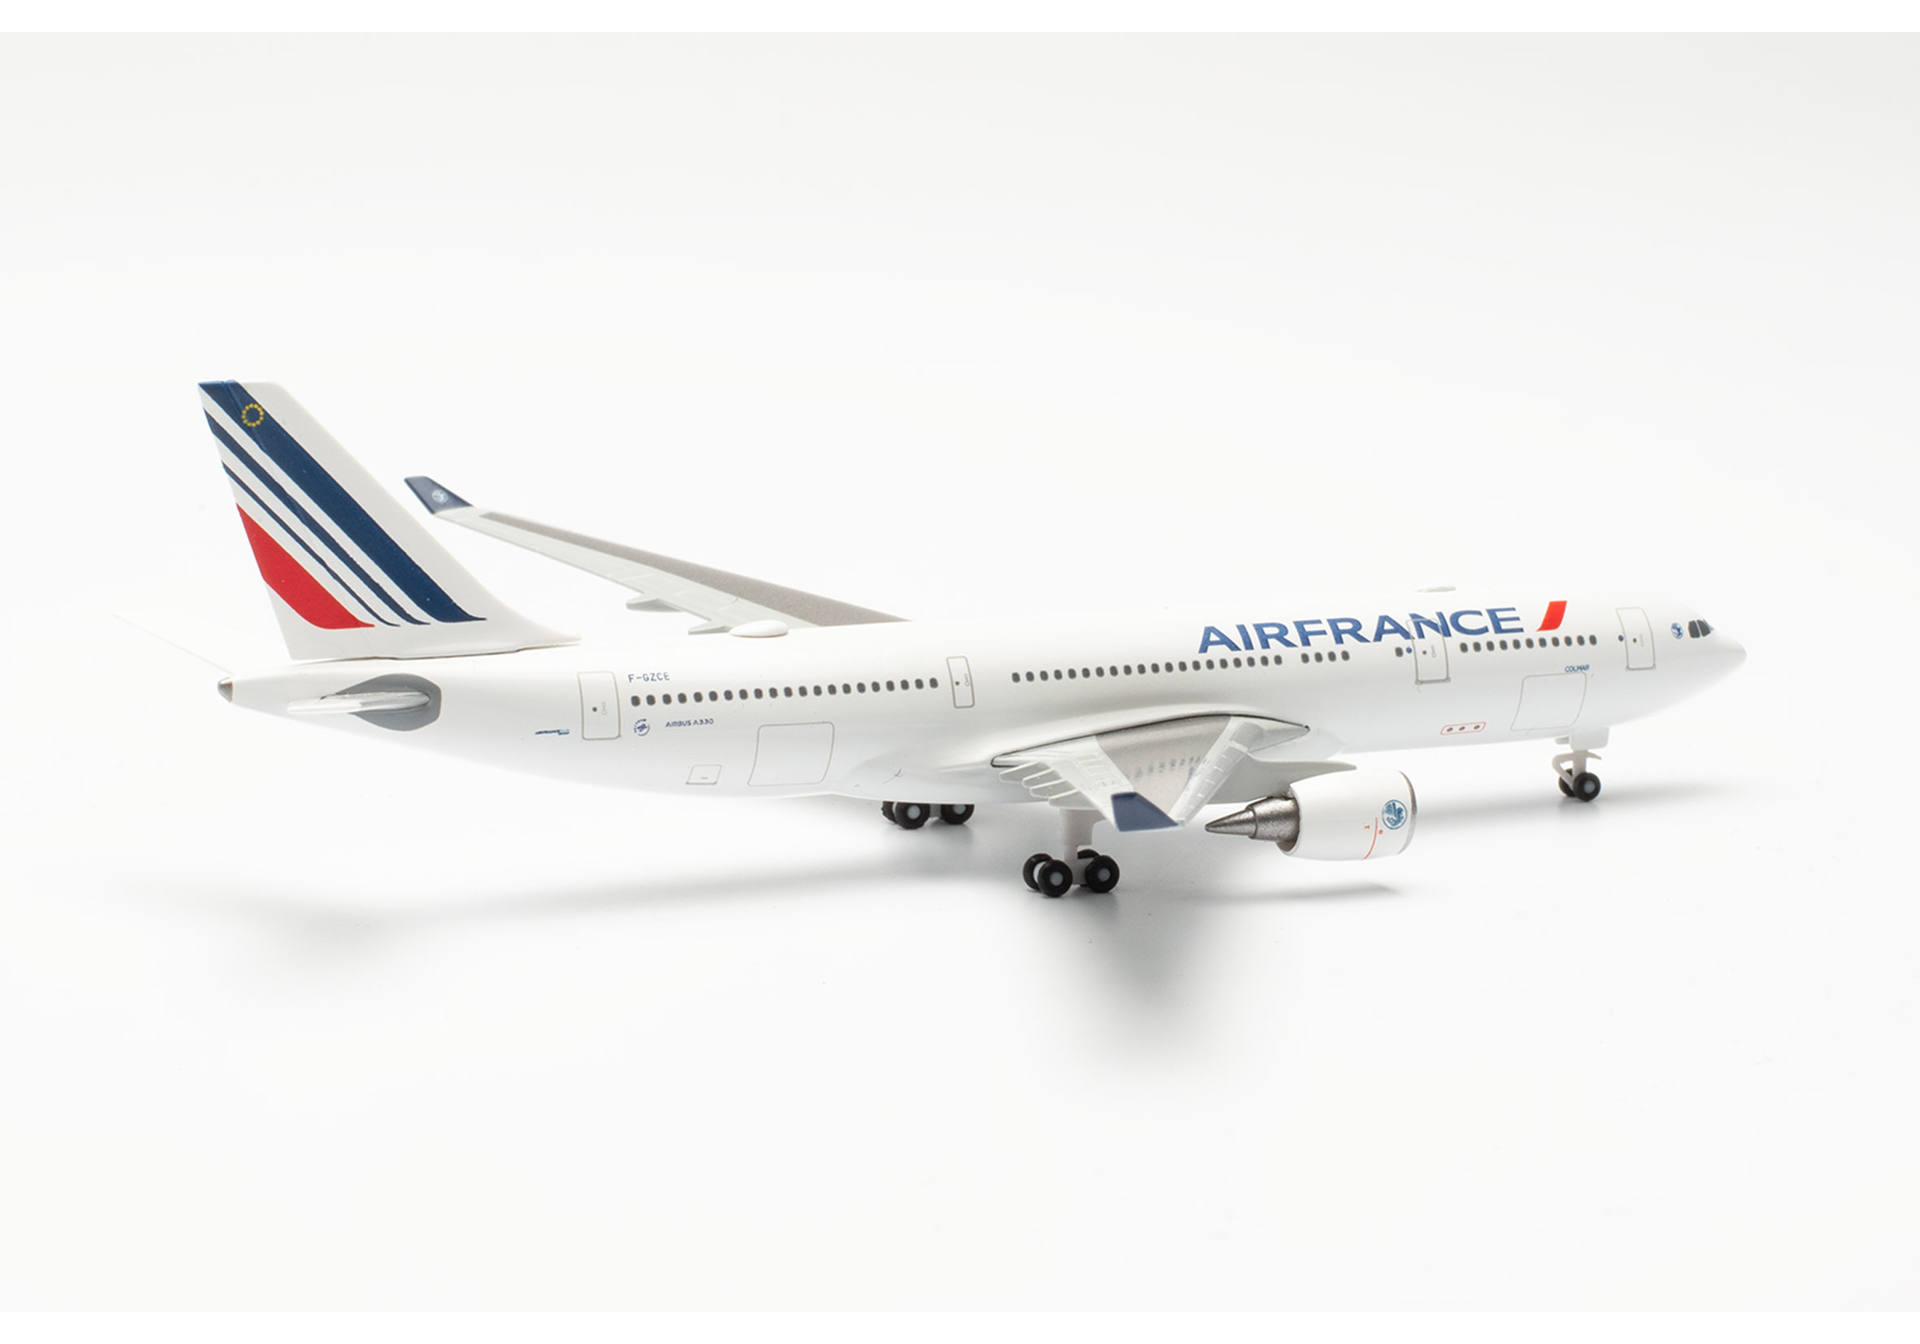 Air France Airbus A330-200 (new colors) - F-GCZE "Colmar"